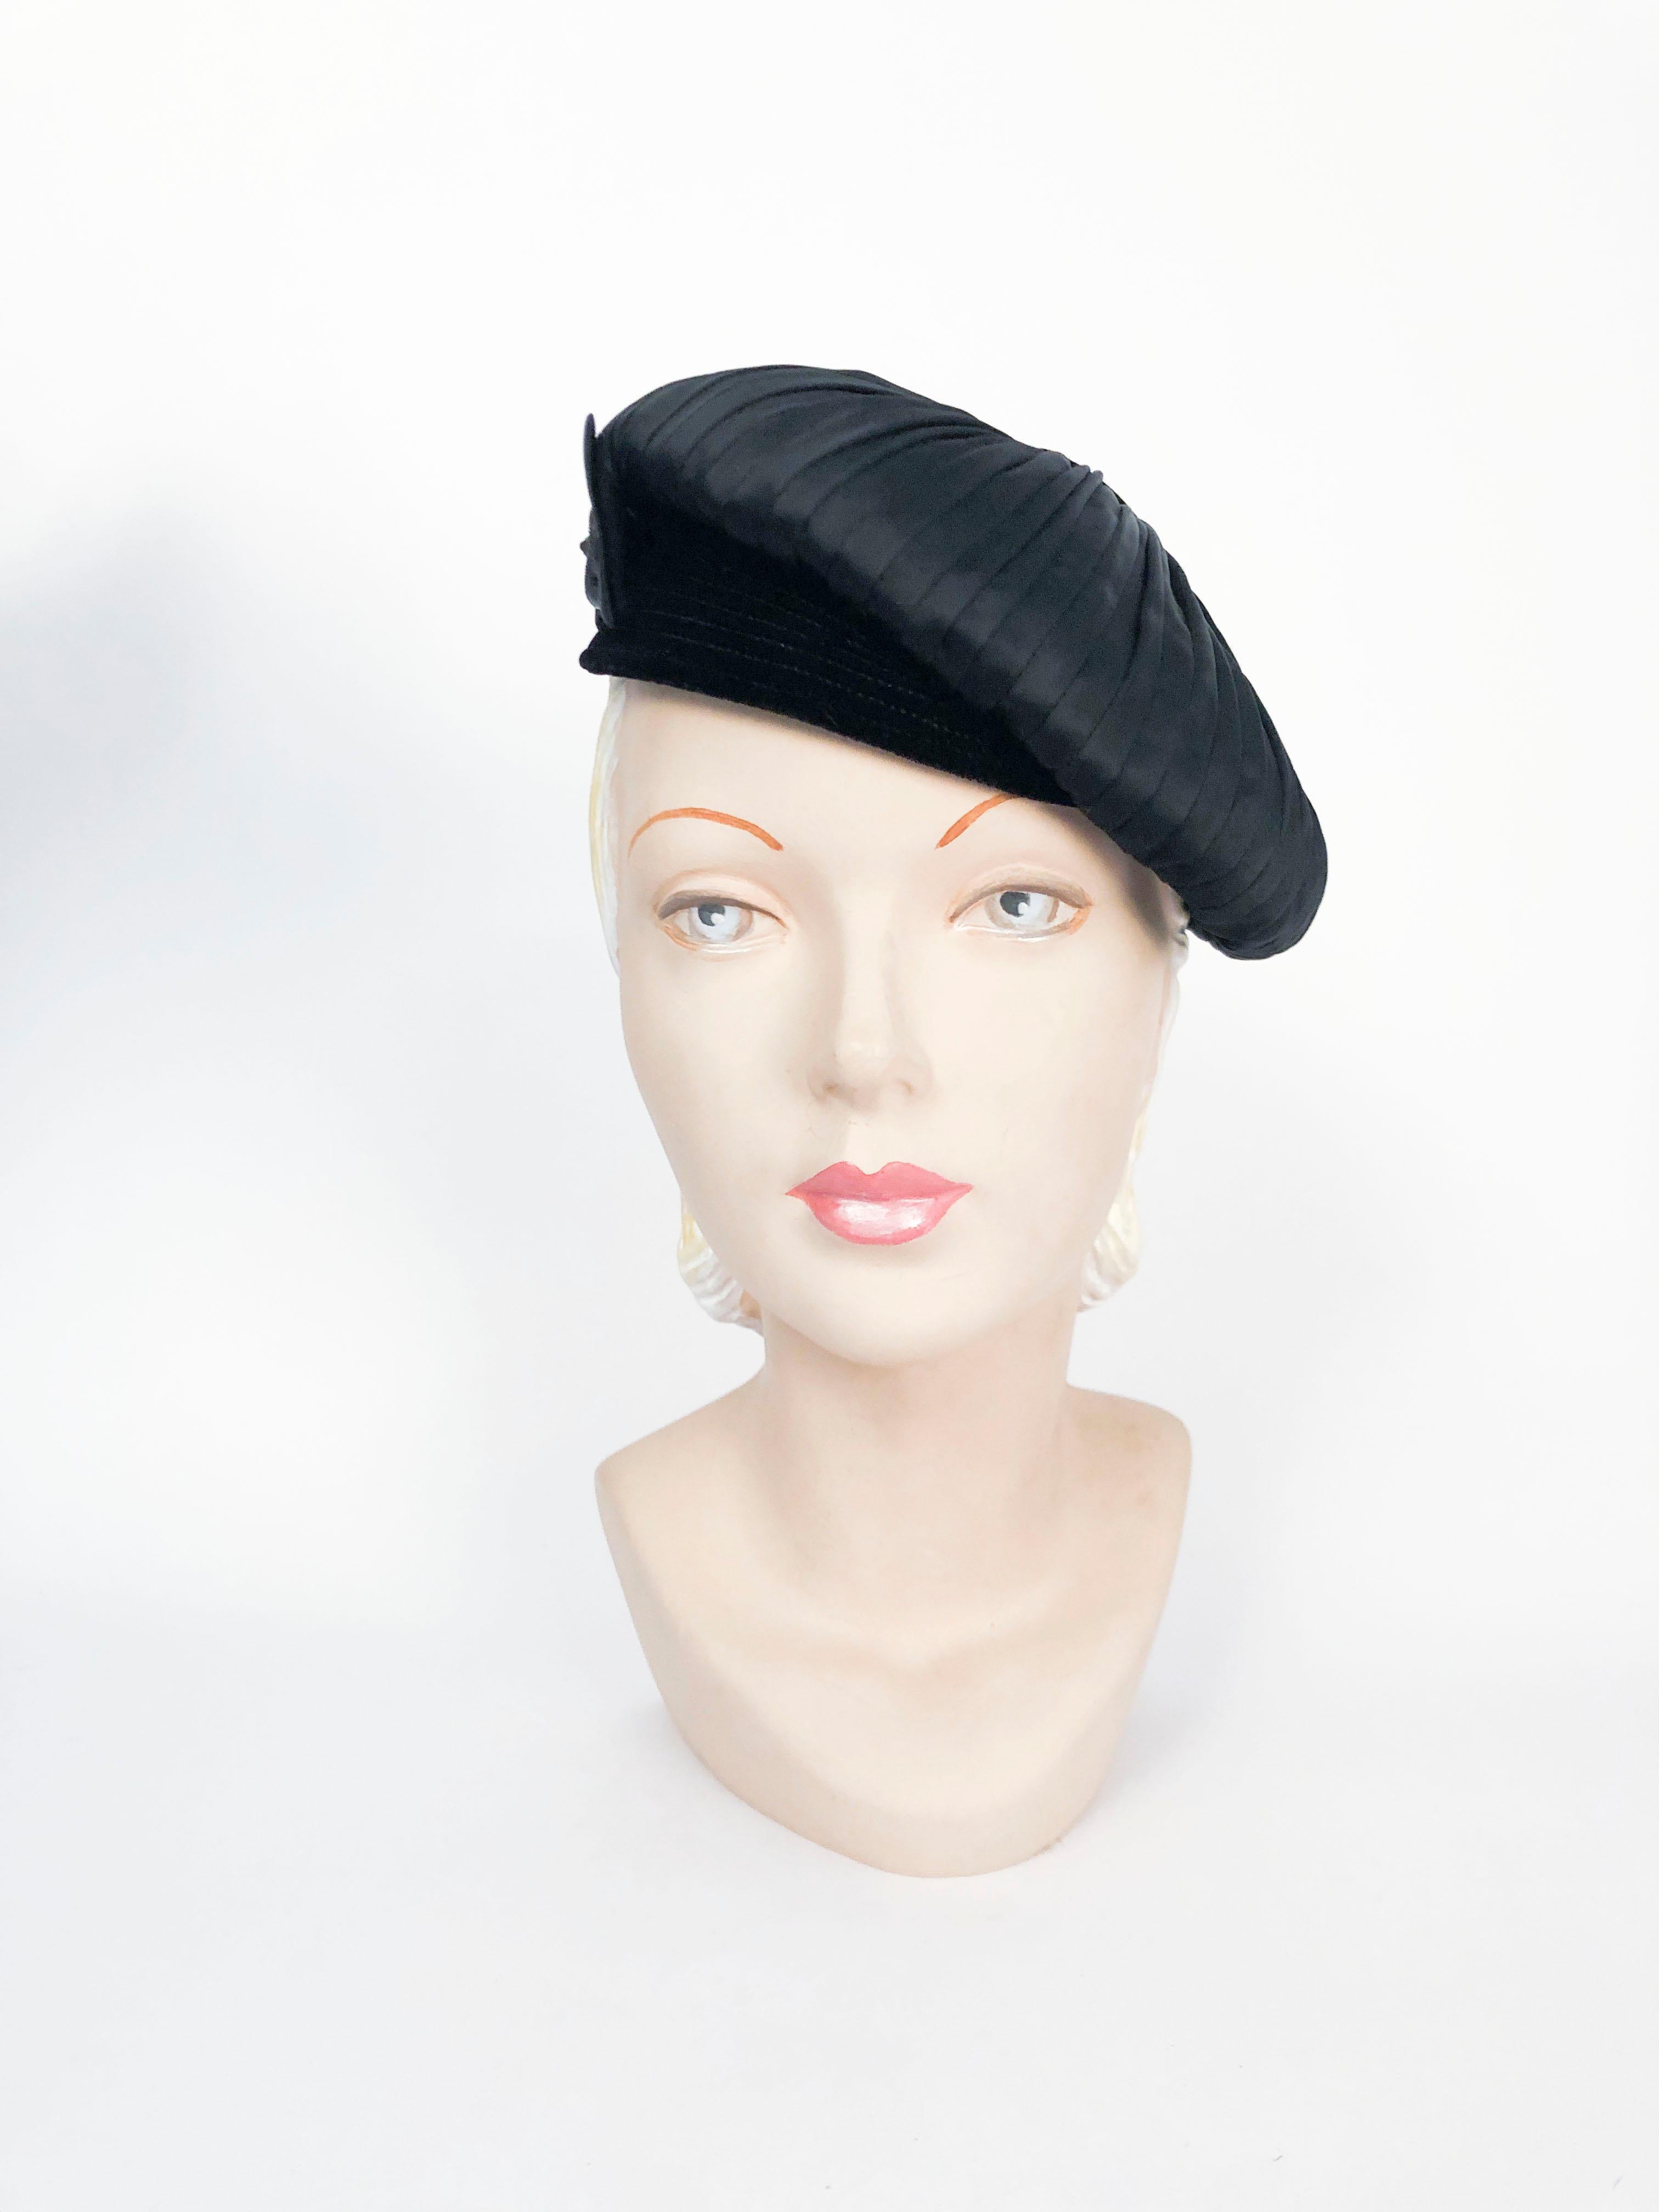 1950s Bonwit Teller black cap/tam that is hand-gathered satin with a black velvet button and bill. Accented with satin bow and articulating button. 